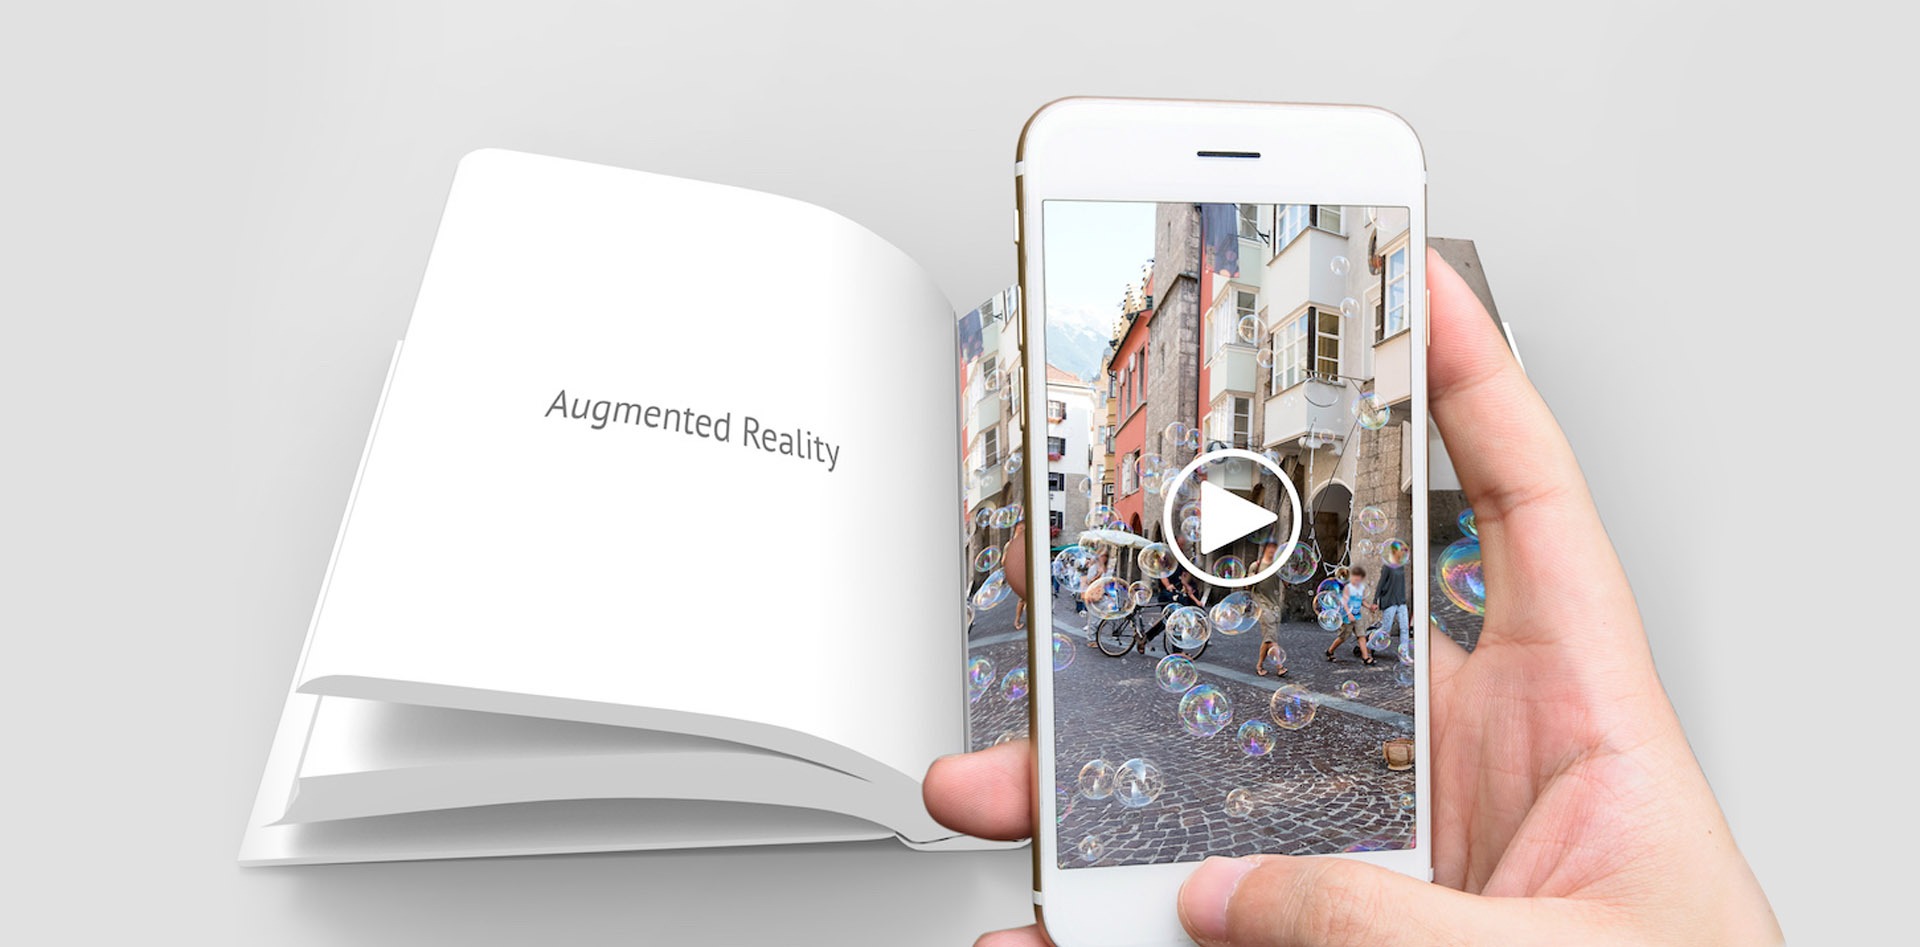 Augmented reality apps in 2021
                       